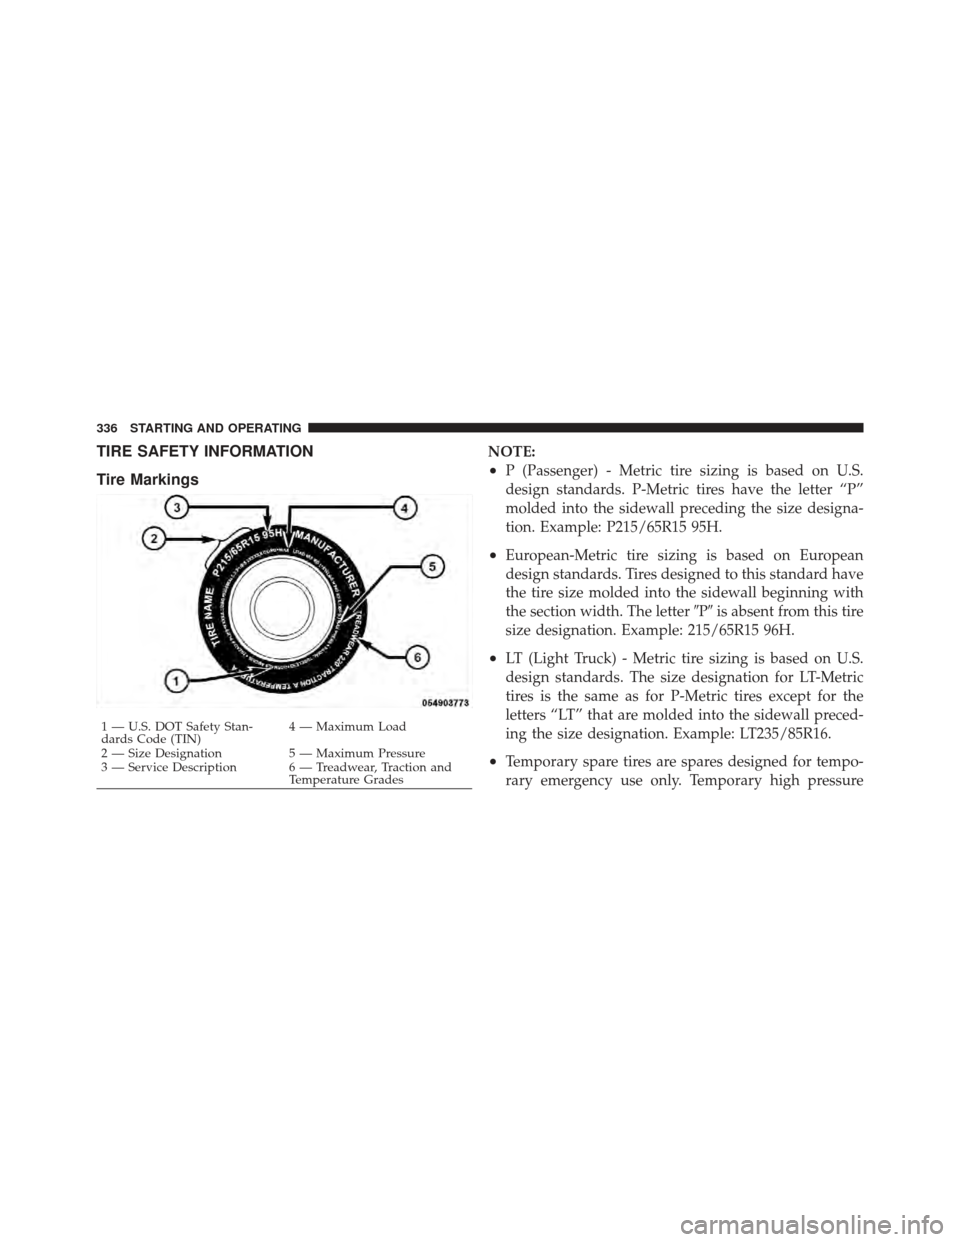 DODGE AVENGER 2012 2.G User Guide TIRE SAFETY INFORMATION
Tire MarkingsNOTE:
•P (Passenger) - Metric tire sizing is based on U.S.
design standards. P-Metric tires have the letter “P”
molded into the sidewall preceding the size d